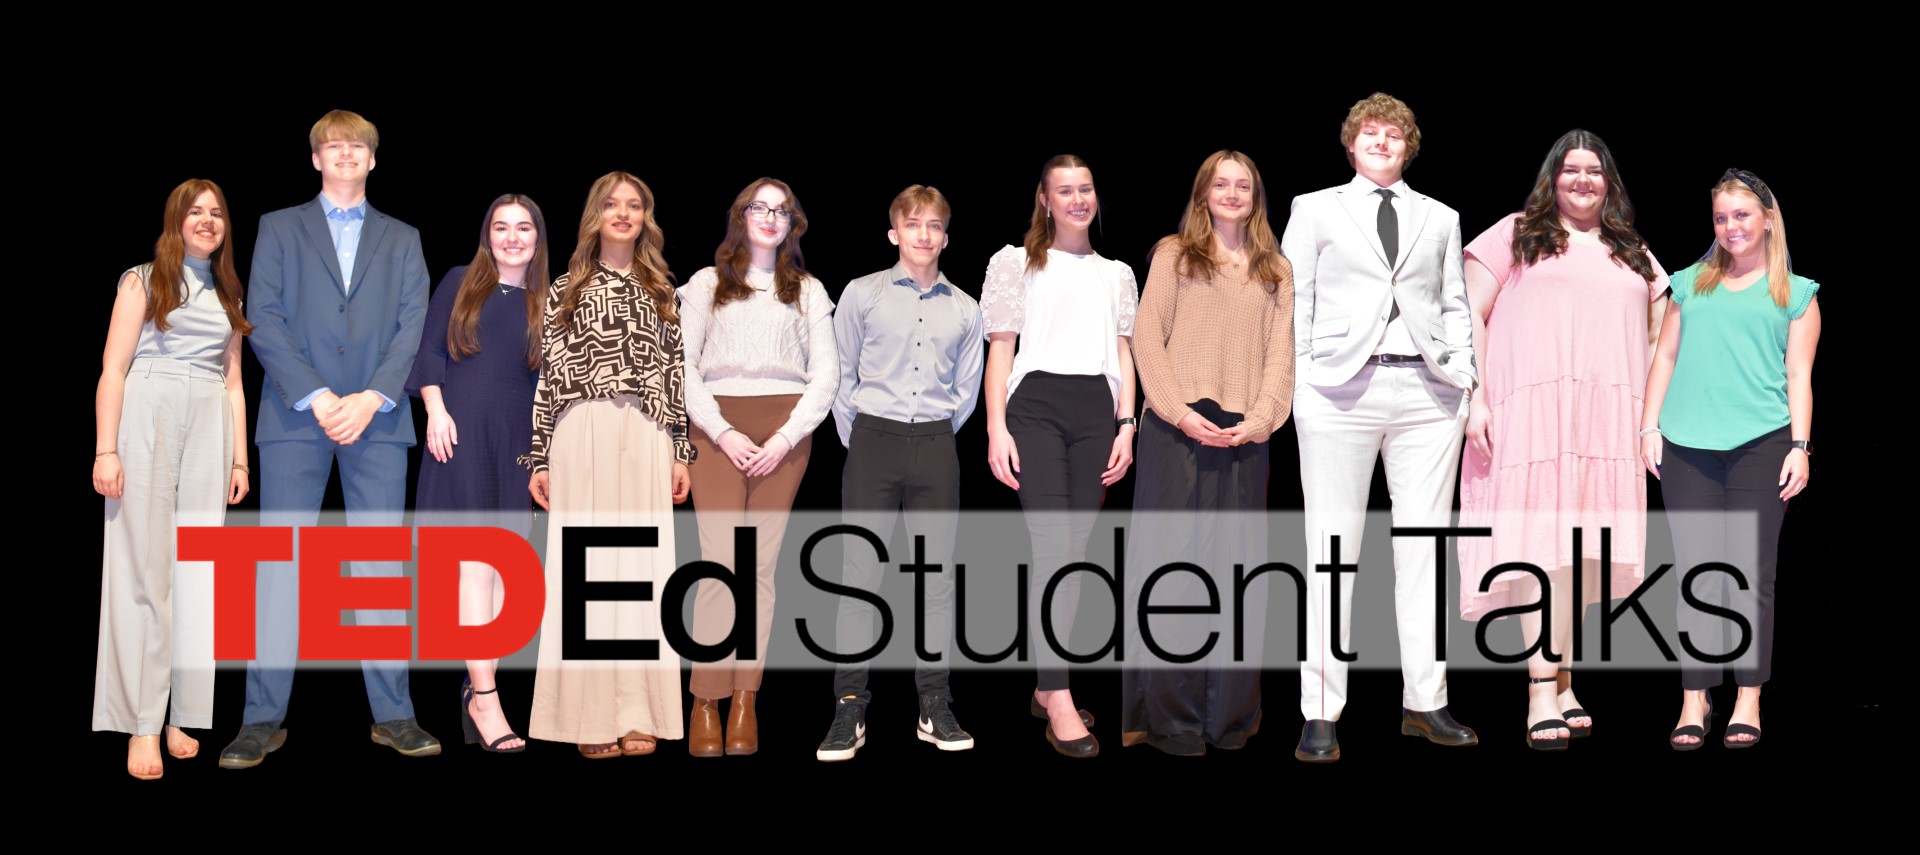 Clinton County High School Dual Credit students with "Ted Ed Student Talks"